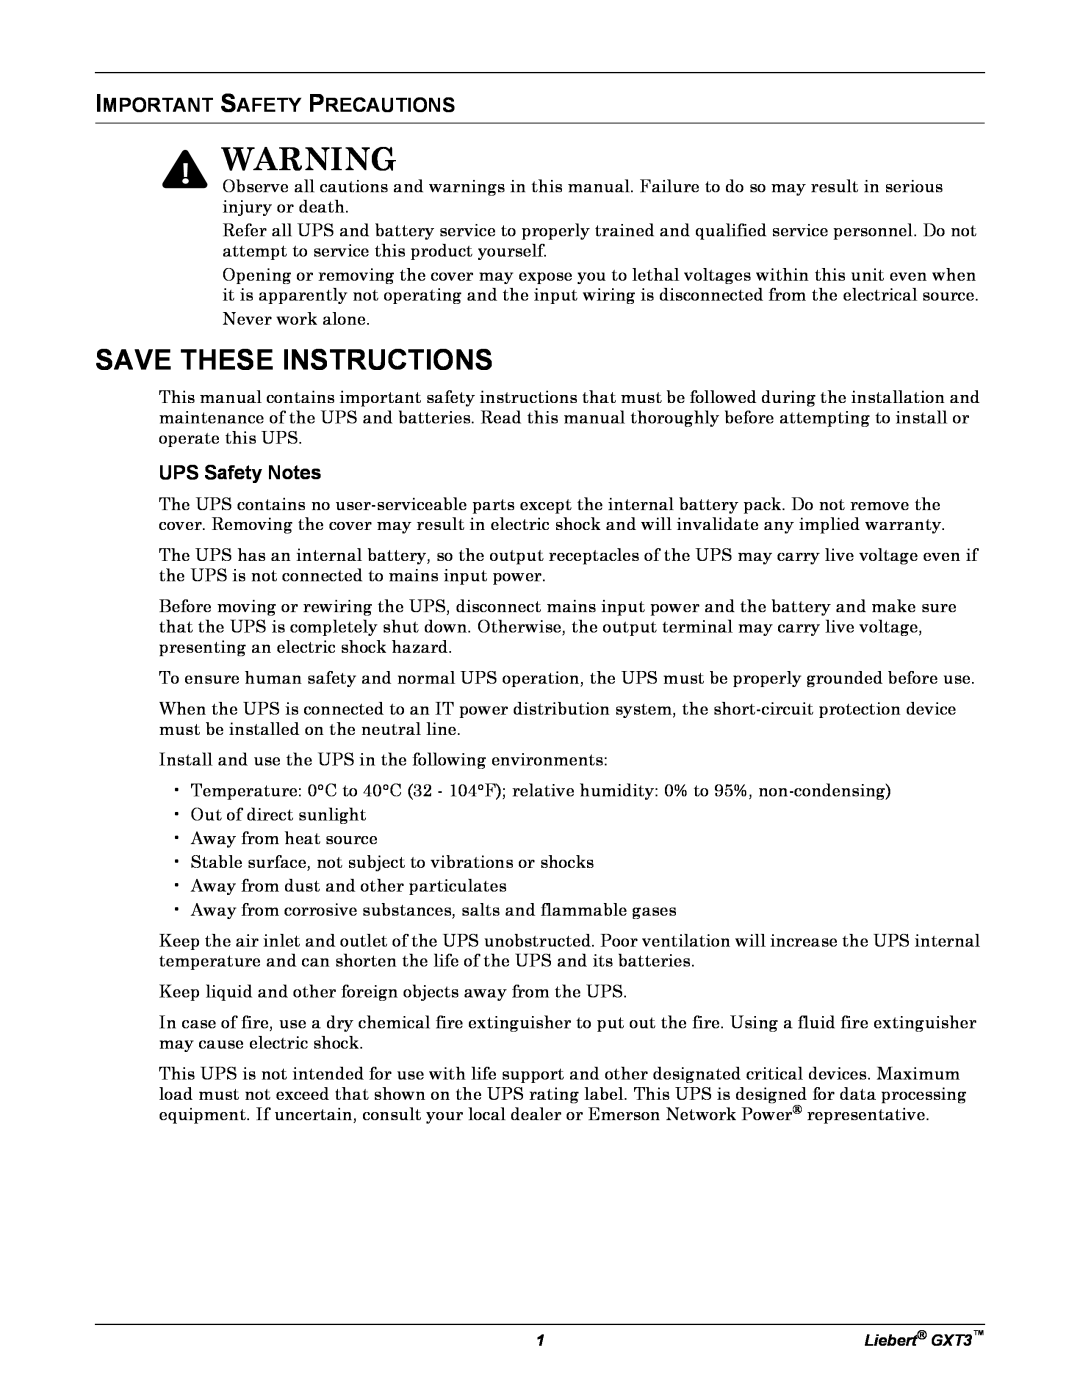 Liebert 700VA, GXT3, 3000VA user manual Important Safety Precautions, UPS Safety Notes, Save These Instructions 